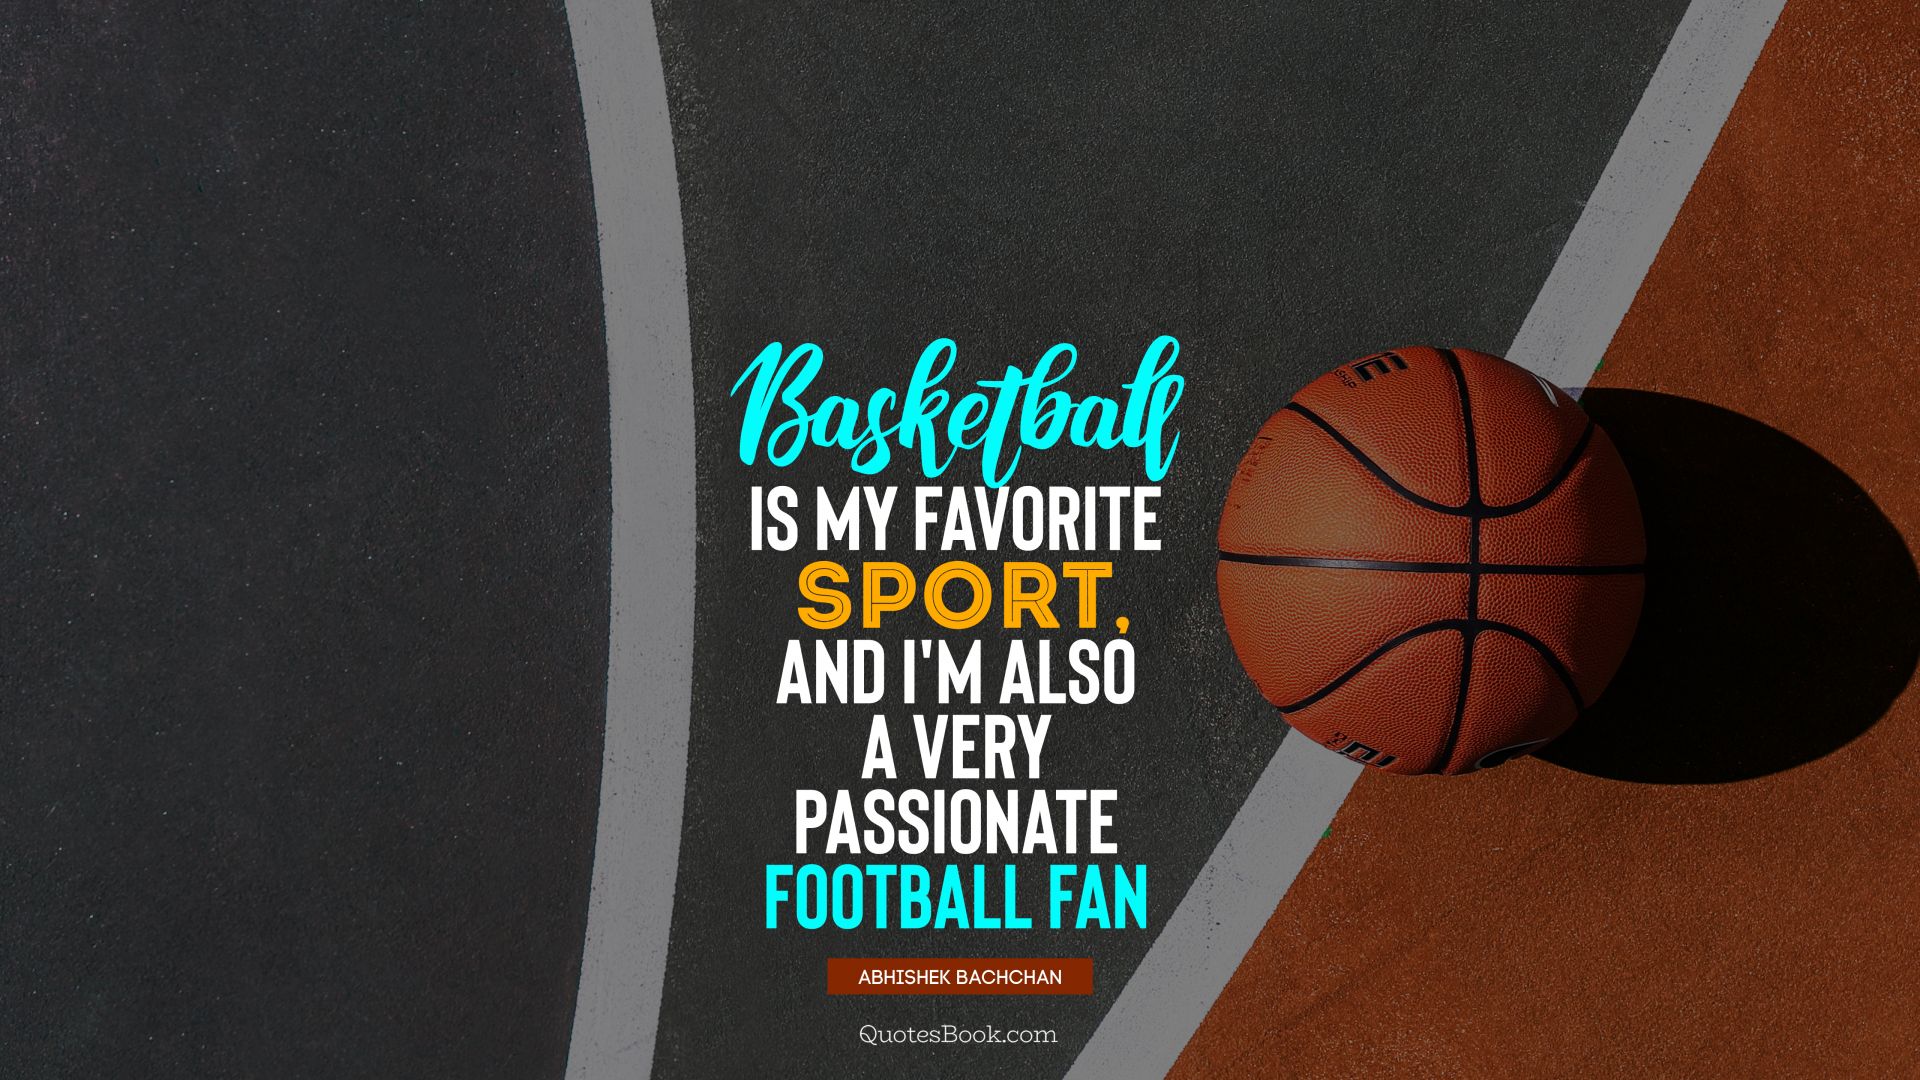 Basketball is my favorite sport, and I'm also a very passionate football fan. - Quote by Abhishek Bachchan